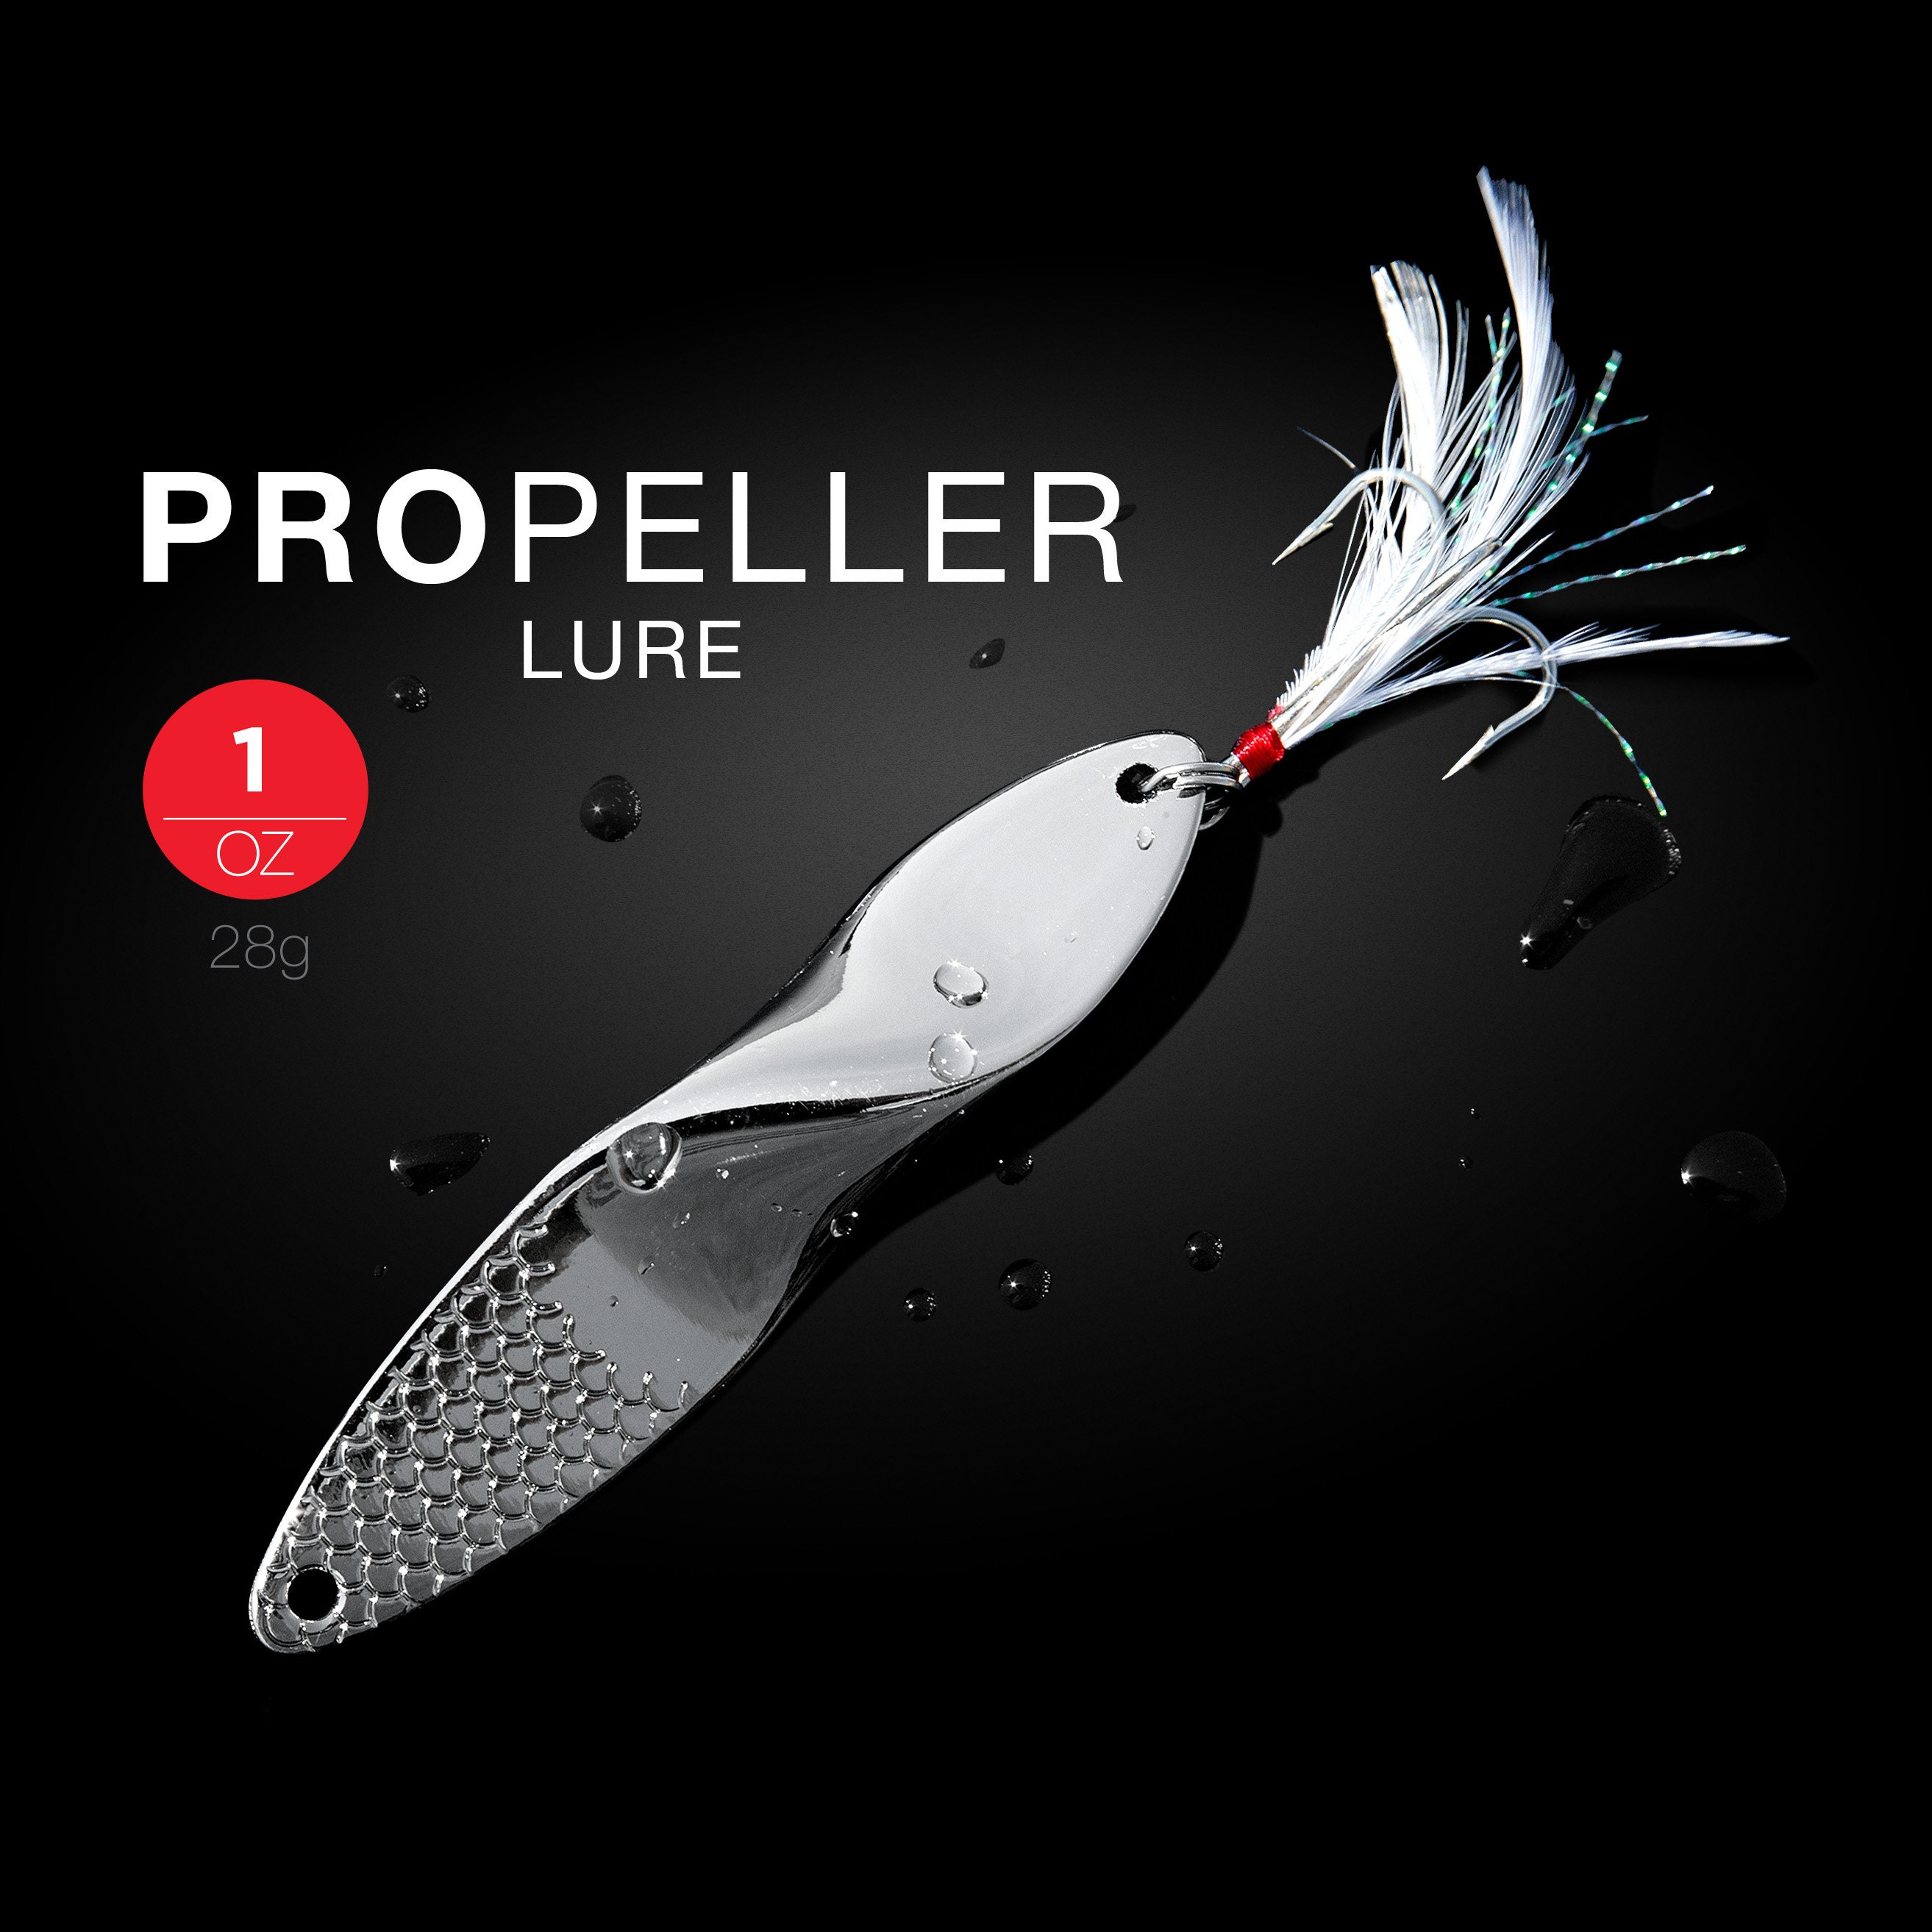 Propeller Metal Fishing Lure With Treble Hooks 1-ounce, 28g 